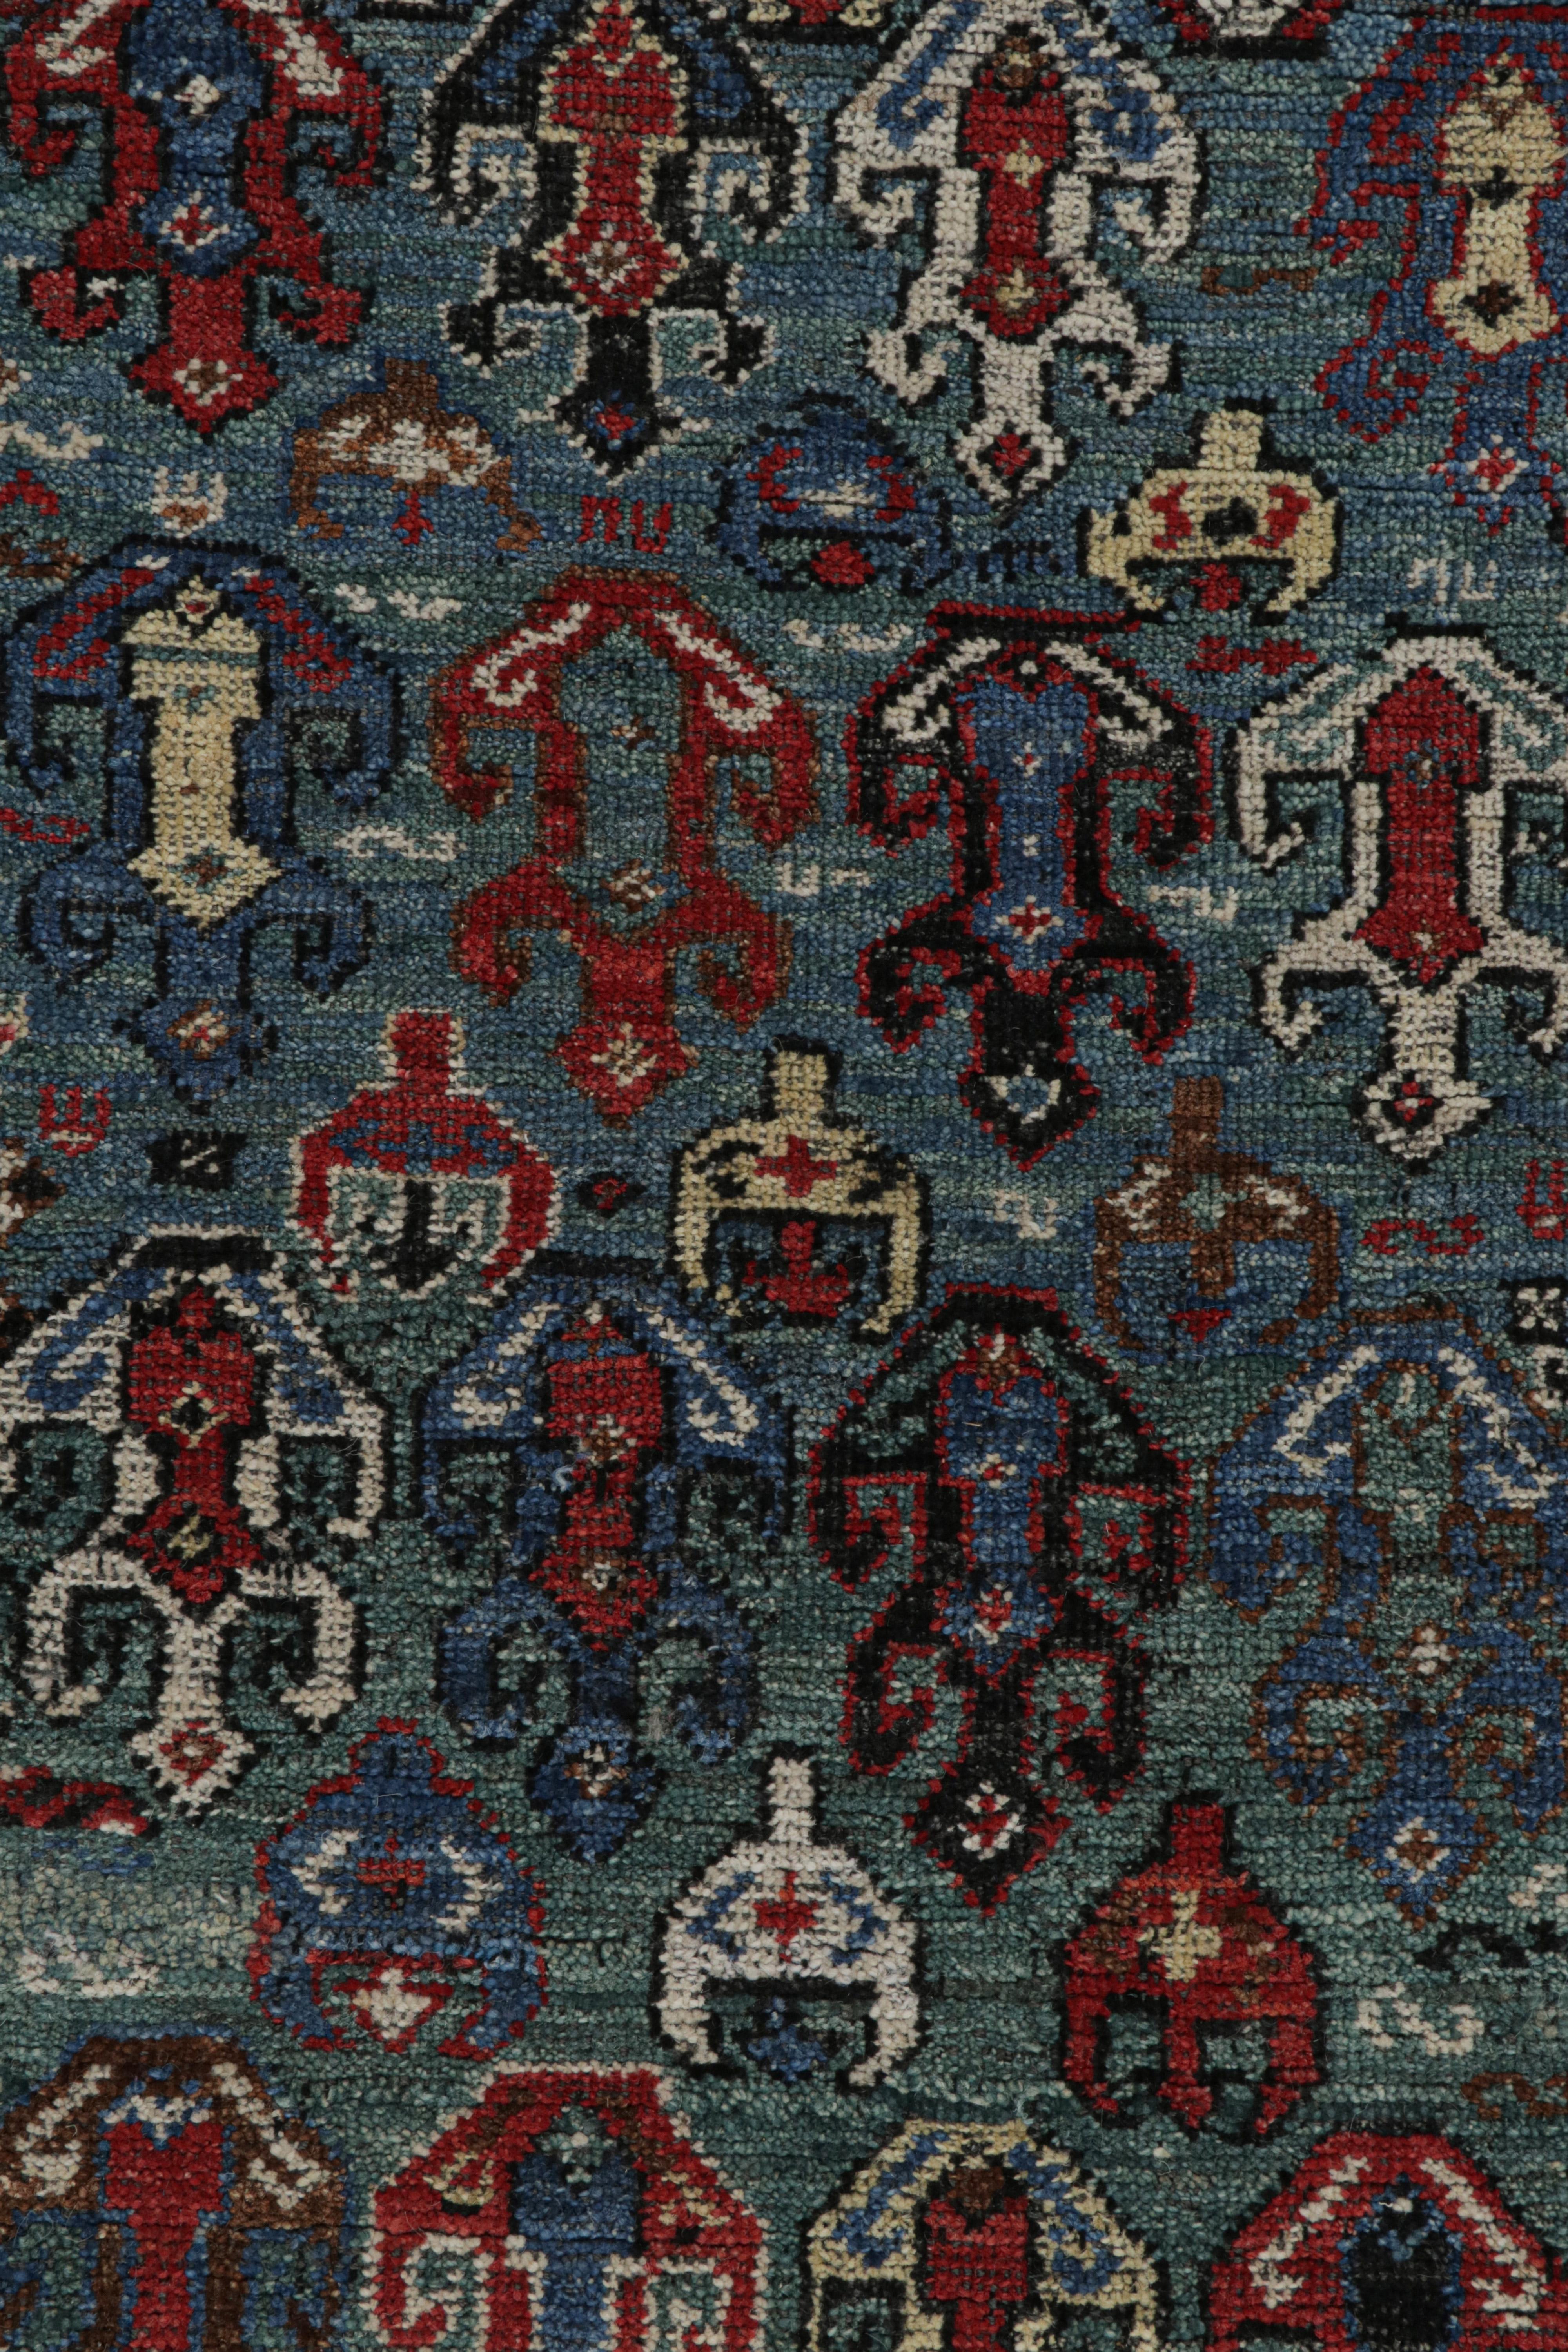 Contemporary Rug & Kilim’s Tribal Style Rug in Green, Blue & Red Geometric Patterns